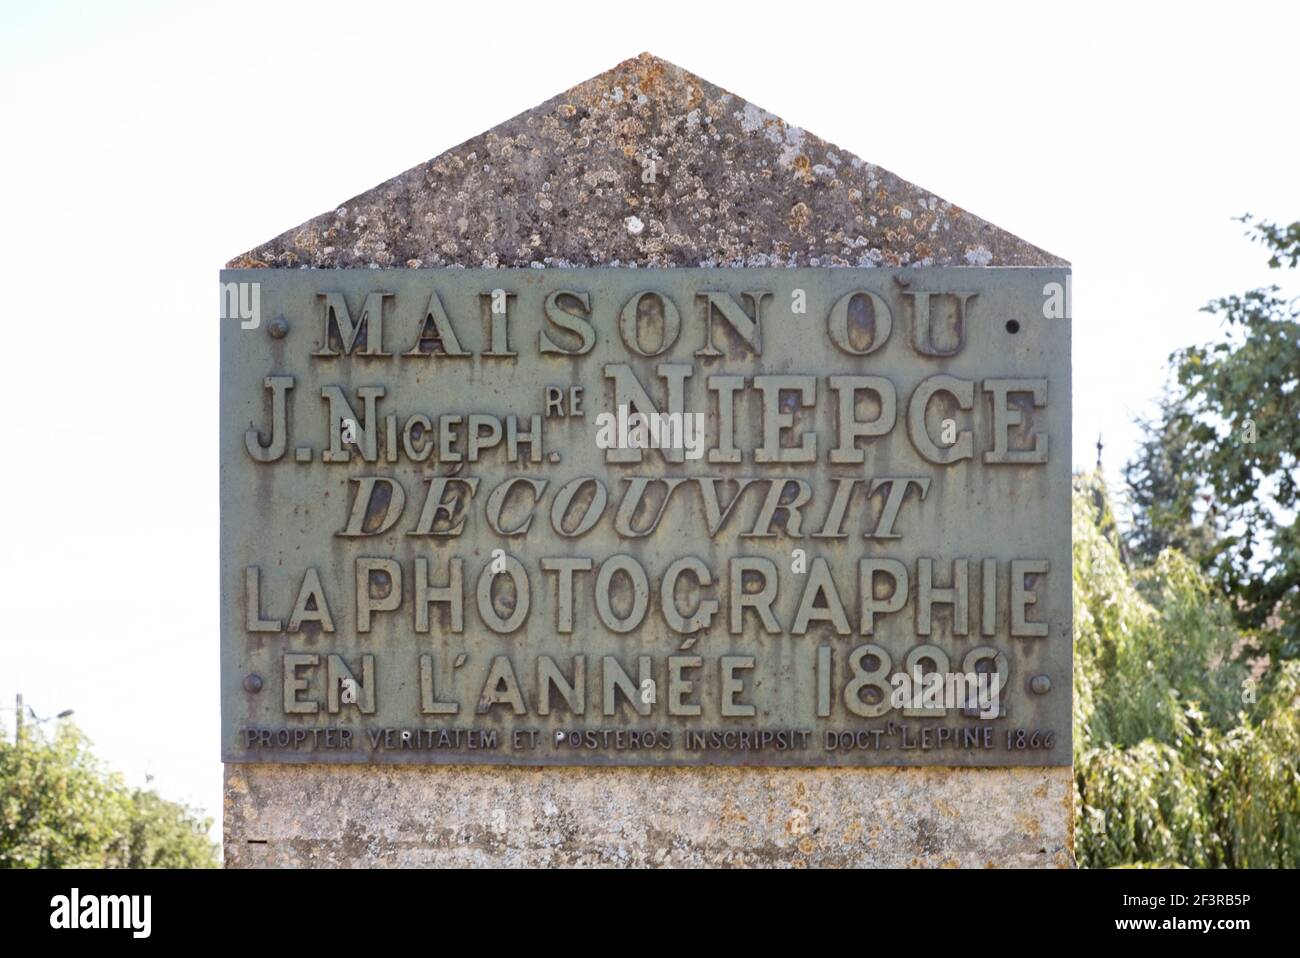 Monument to Joseph Nicephore Niepce, inventor of photography, where first photograph taken in 1822 using helio discography, Saint-Loup-de-Varennes, Ch Stock Photo